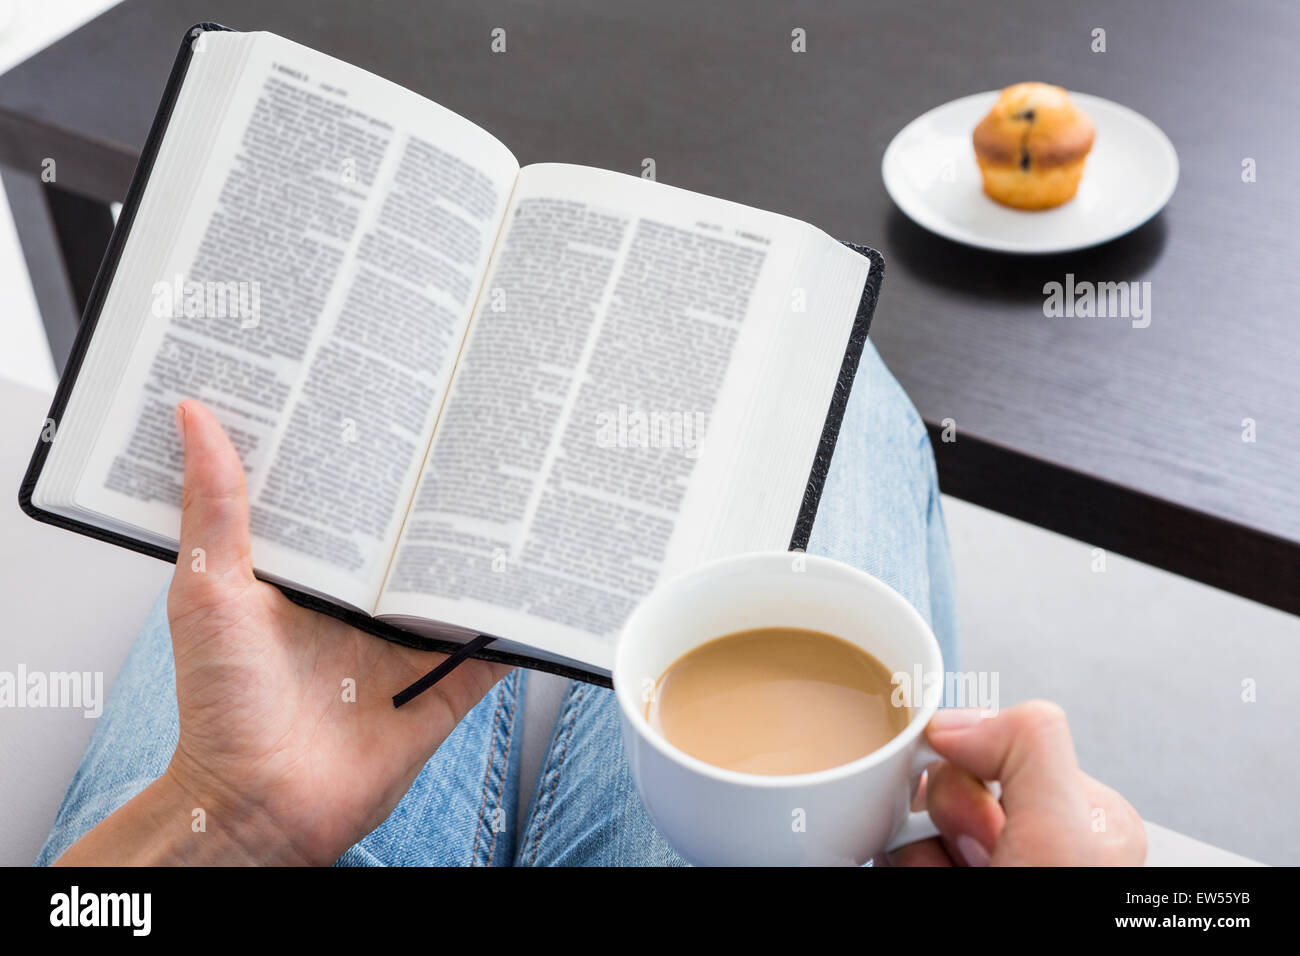 Woman reading a book and holding cup of coffee Stock Photo